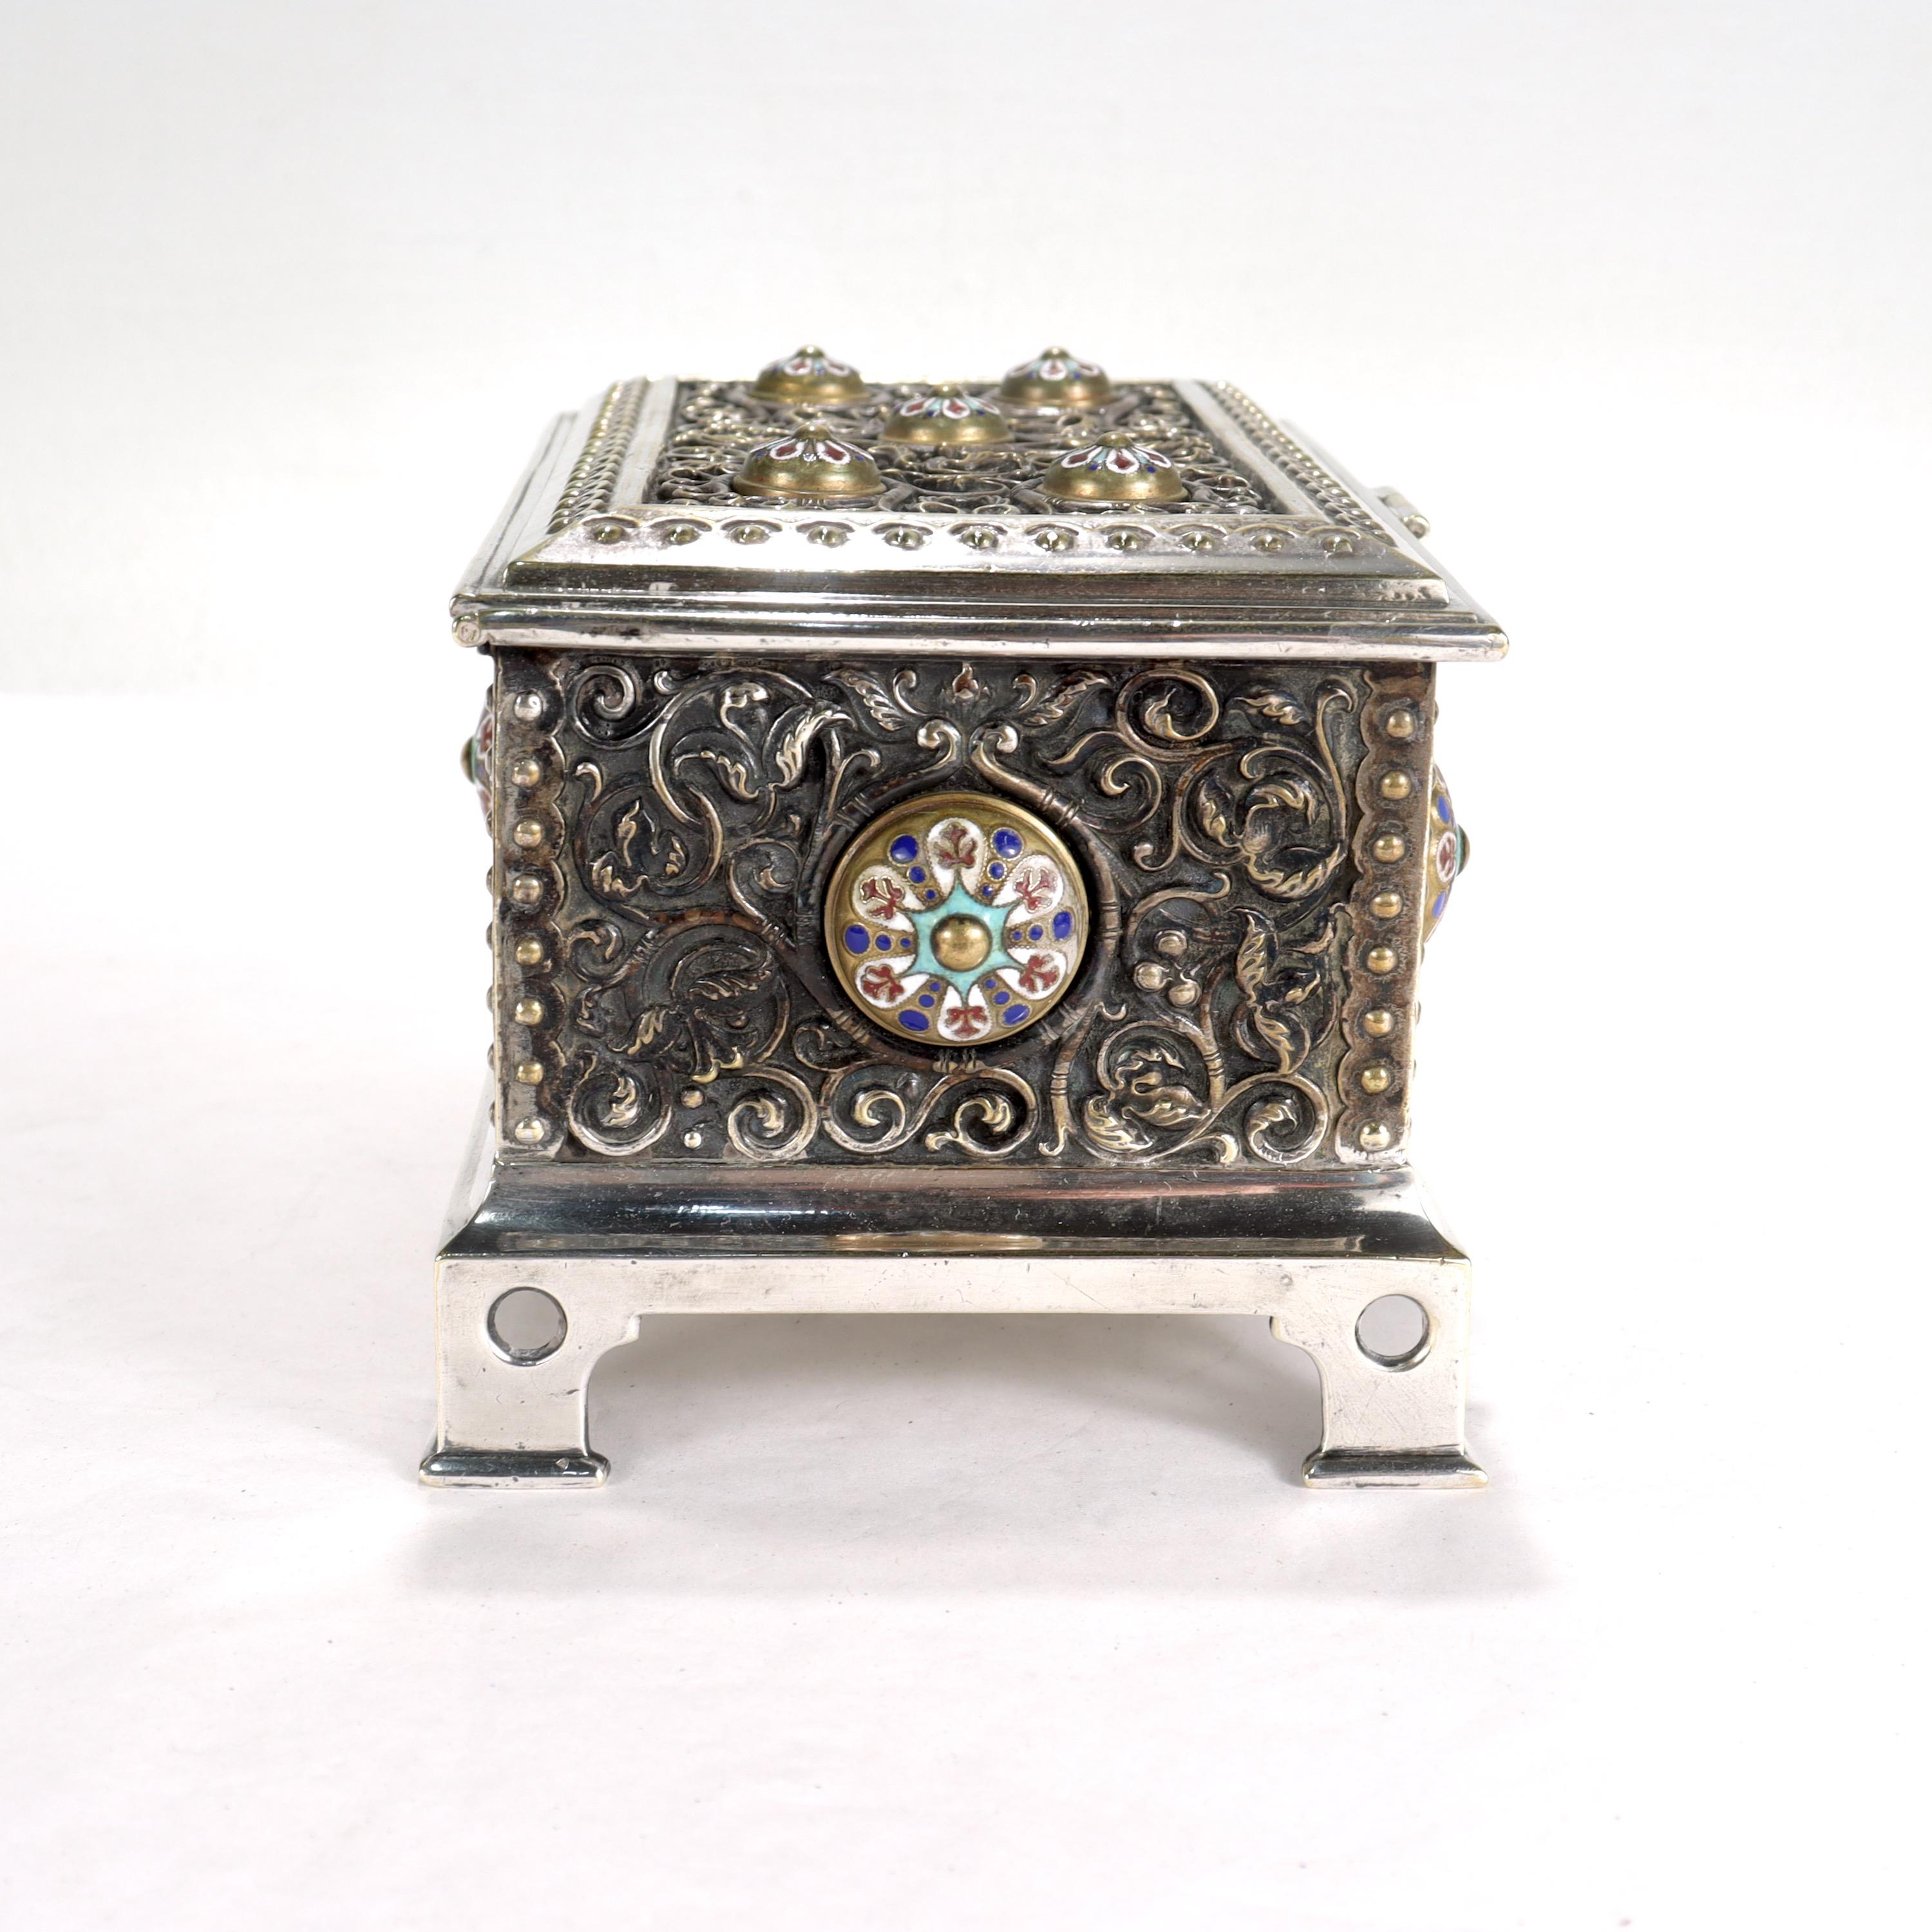 Antique Silver Plated & Enameled Table Box or Casket in the Russian Taste For Sale 2